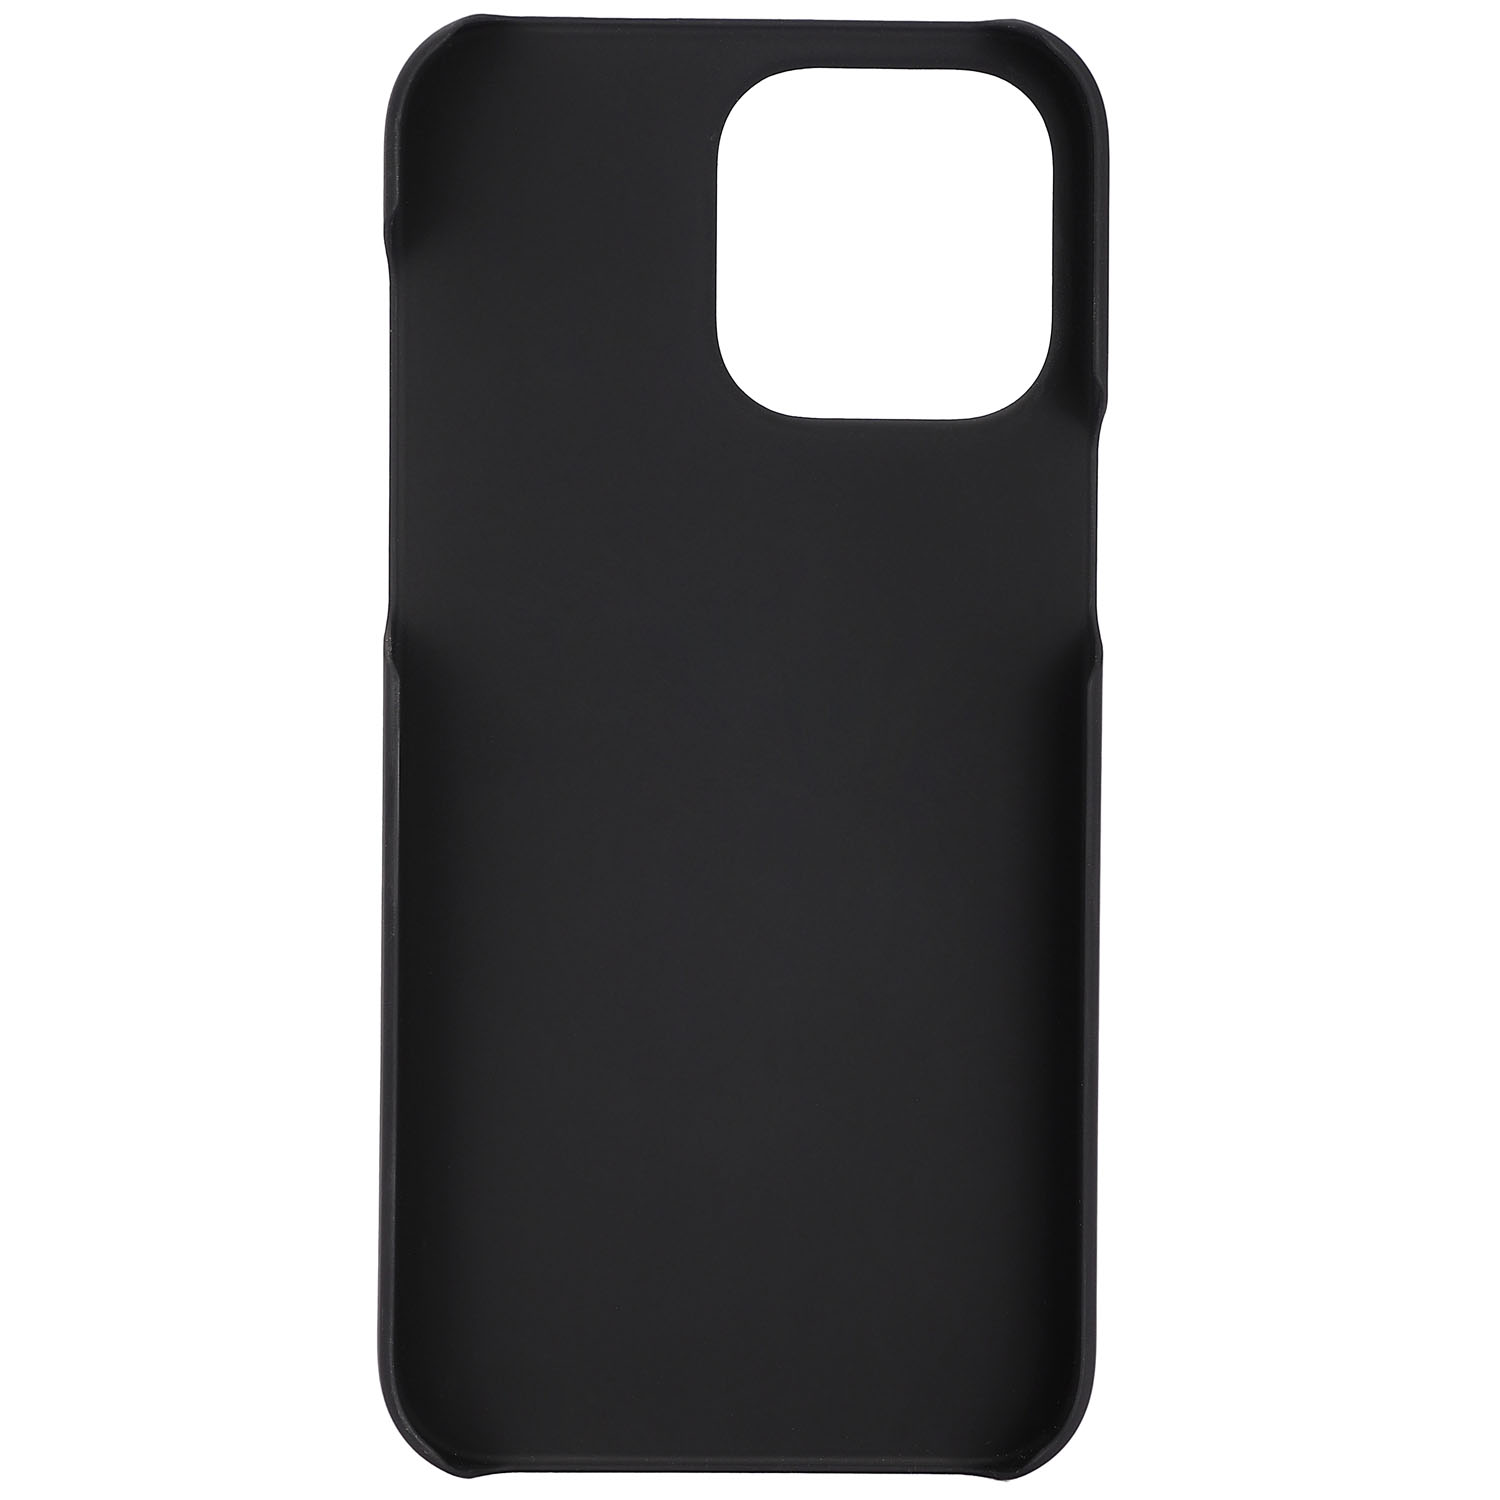 KRUSELL Leder iPhone Schwarz CardCover Apple, Max, Max 14 iPhone Pro Pro Schwarz, Backcover, 14